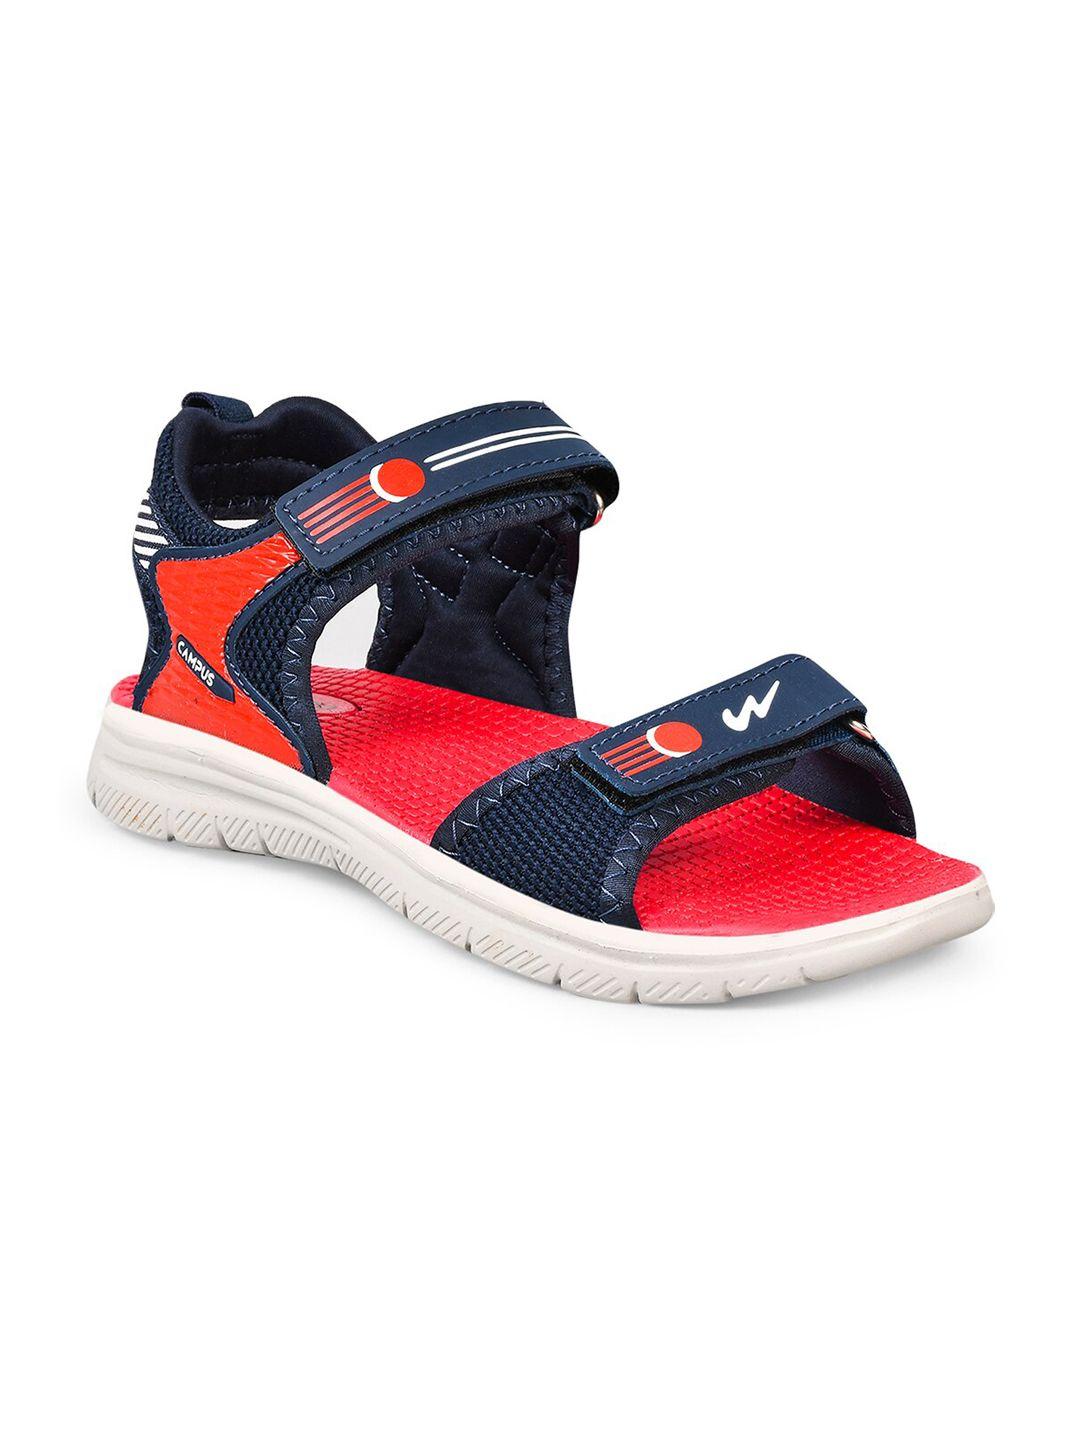 campus kids navy blue & red printed sports sandals